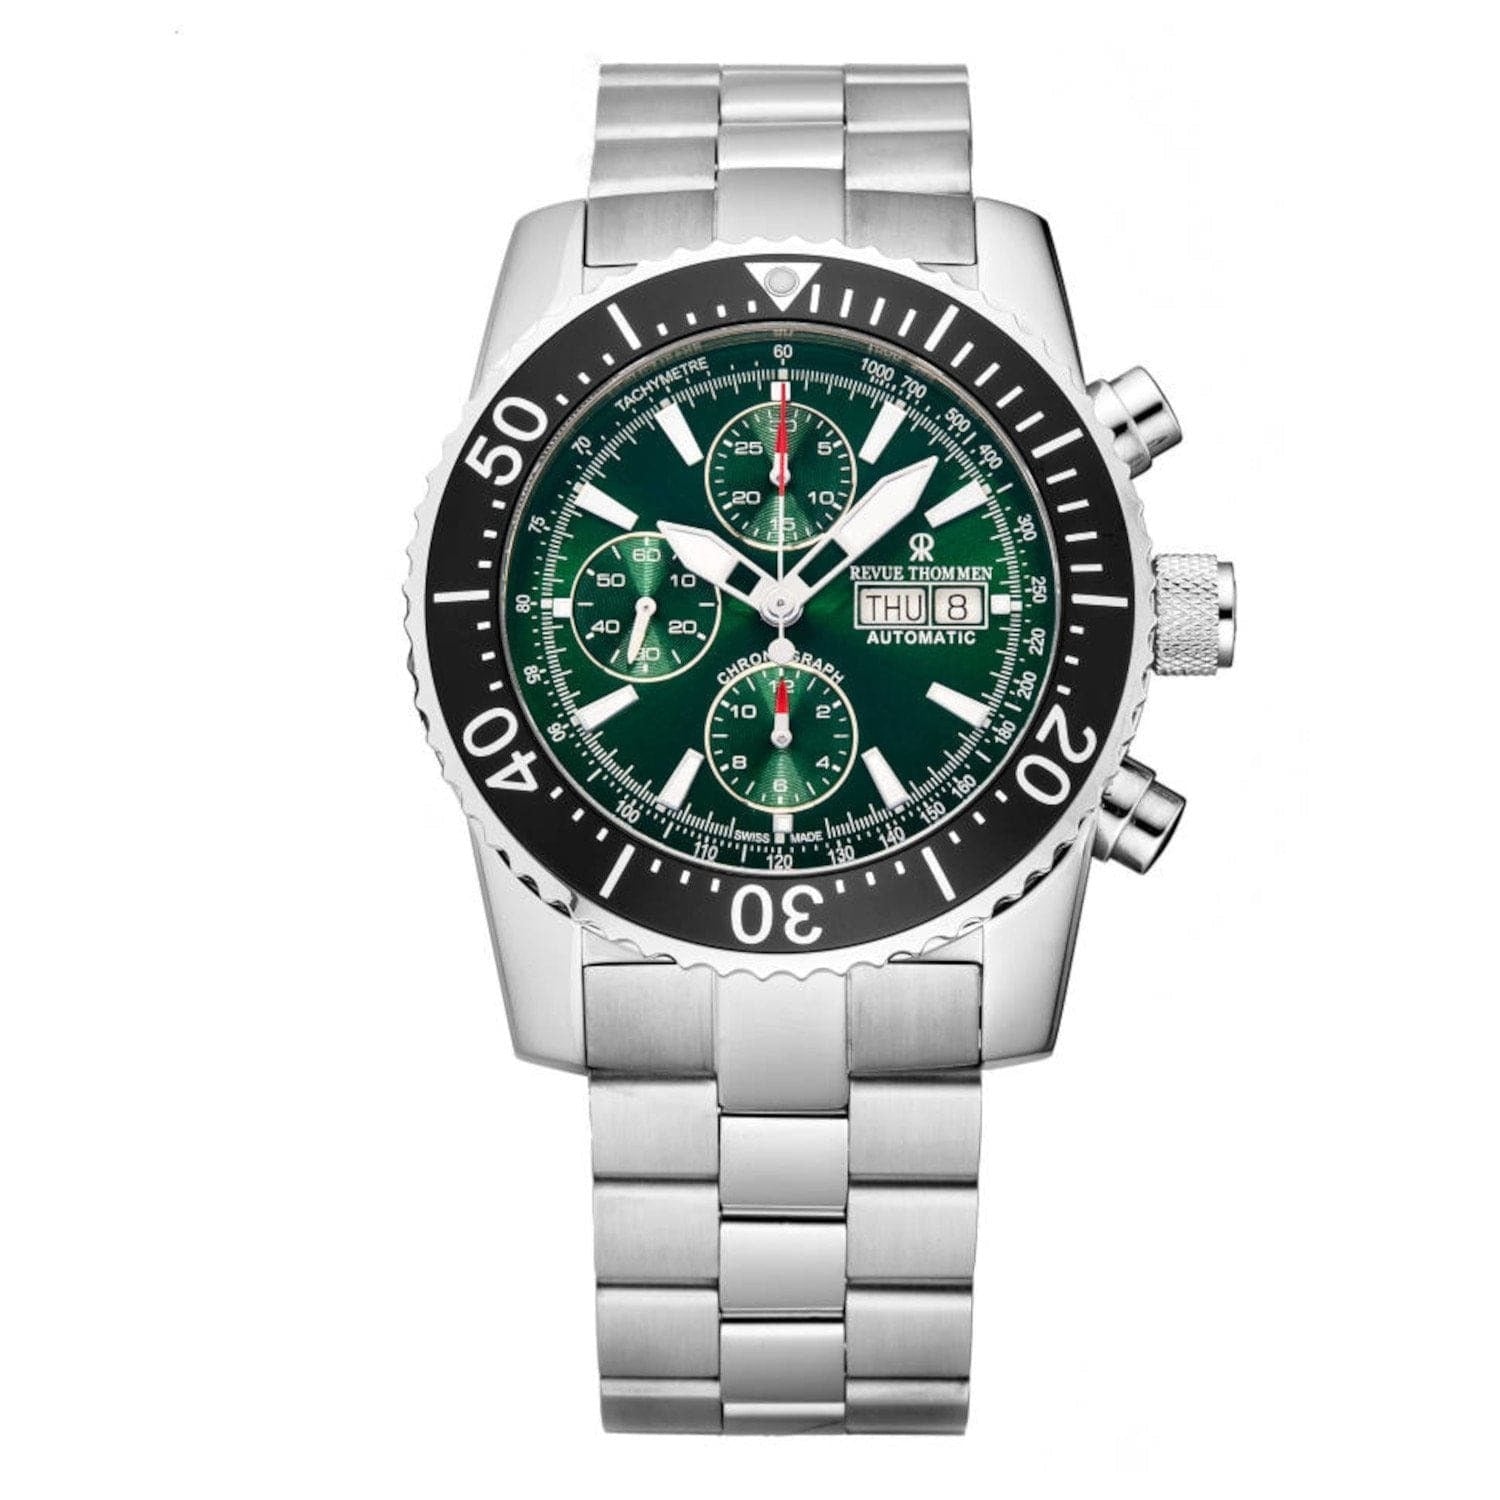 A stainless steel watch with green dials from Revue Thommen Chronograph Automatic Watch.